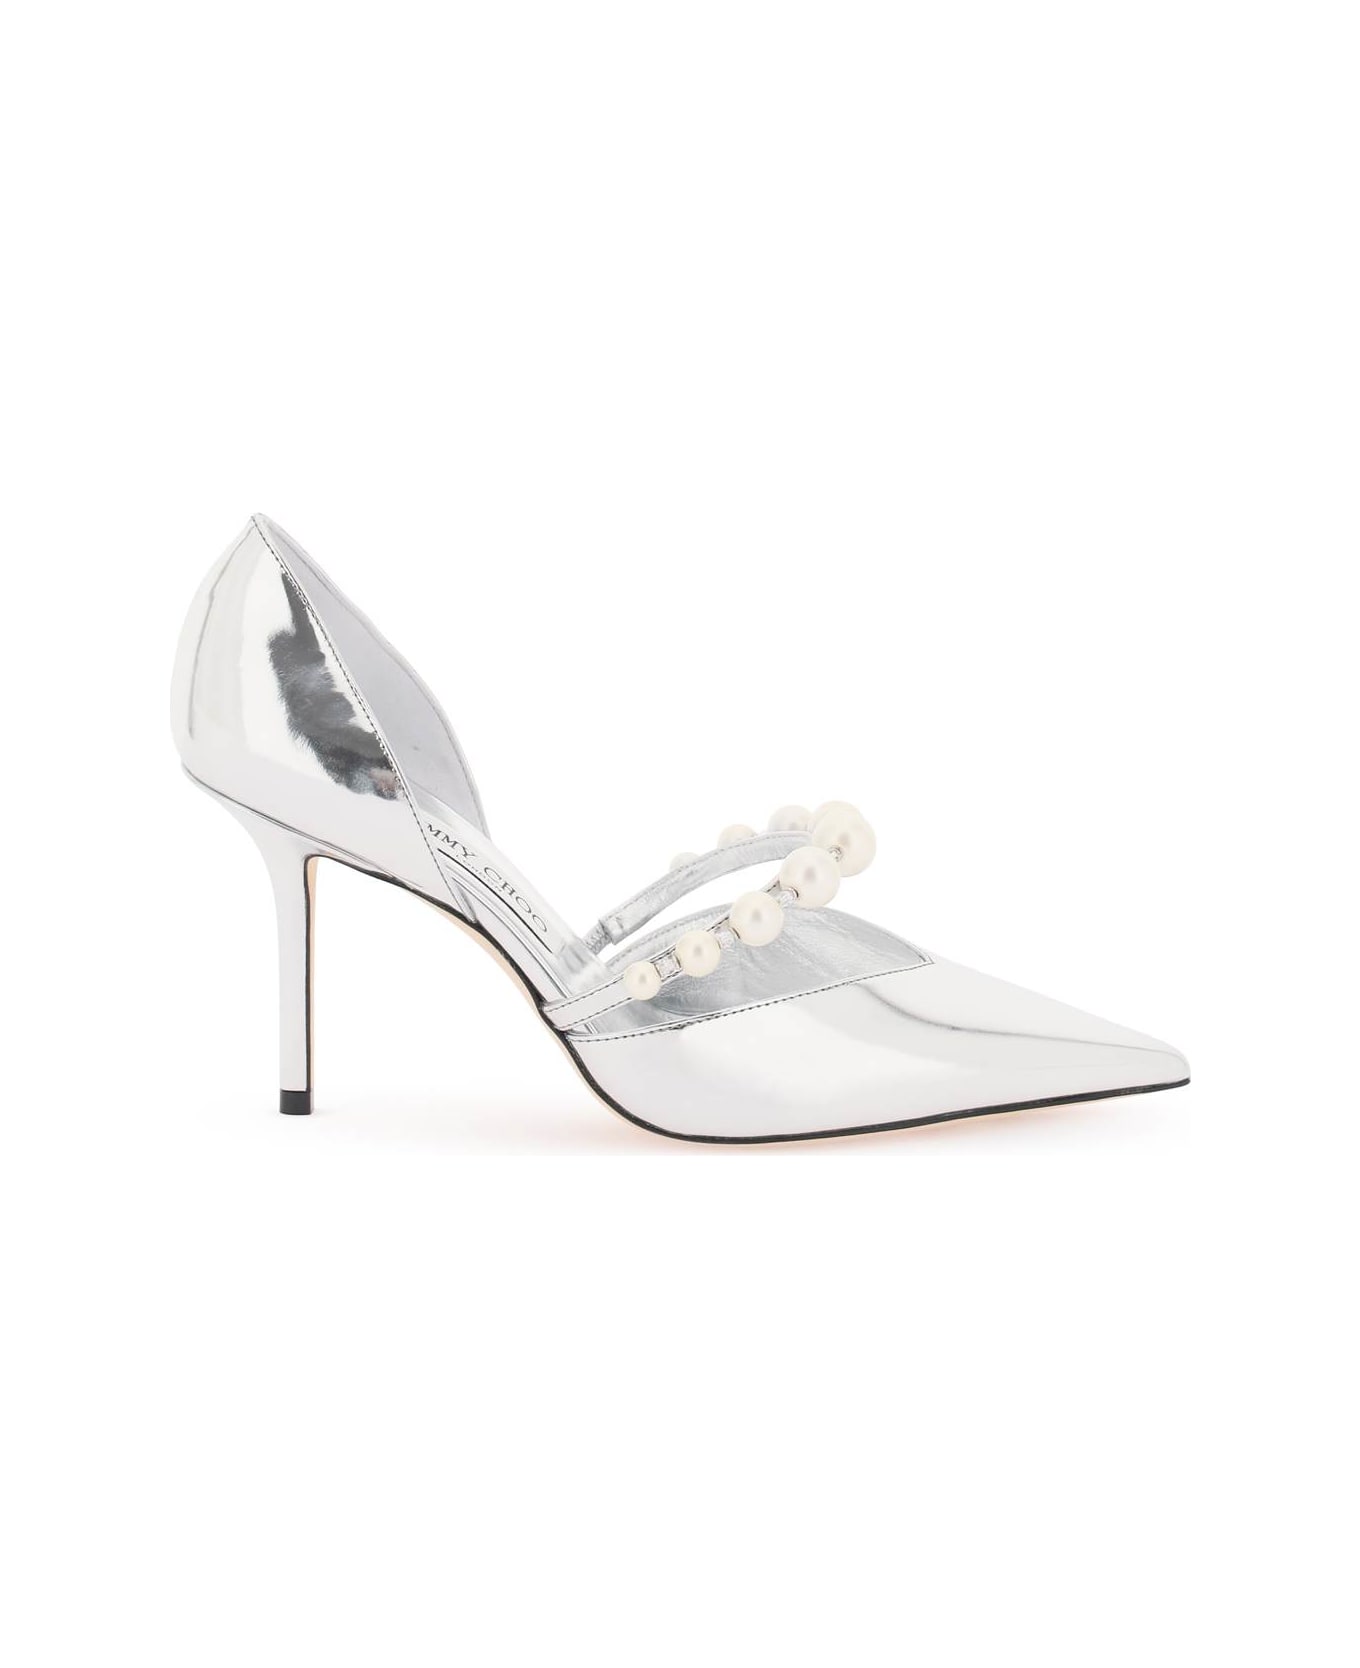 Jimmy Choo Pumps Aurelie 85 With Pearls - SILVER WHITE (Silver)